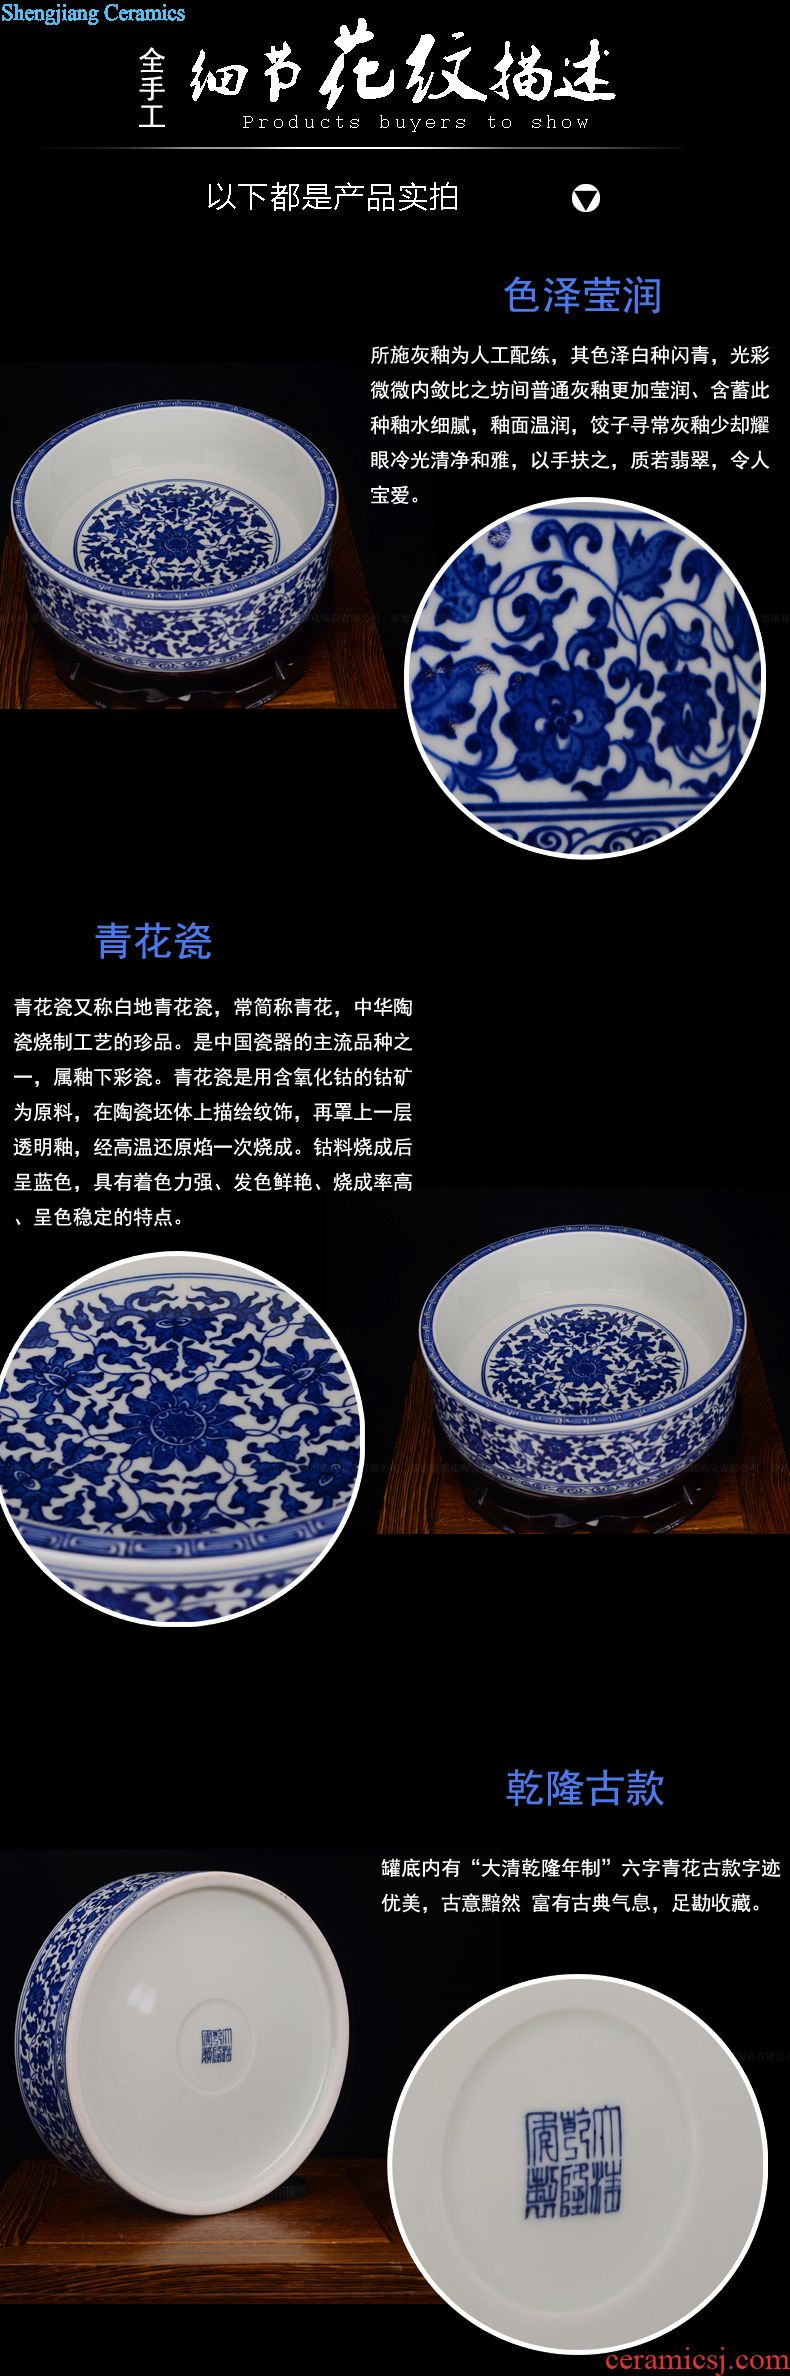 Blue and white landscape stool elephants in jingdezhen ceramics shoes stool crafts home furnishing articles sitting room adornment